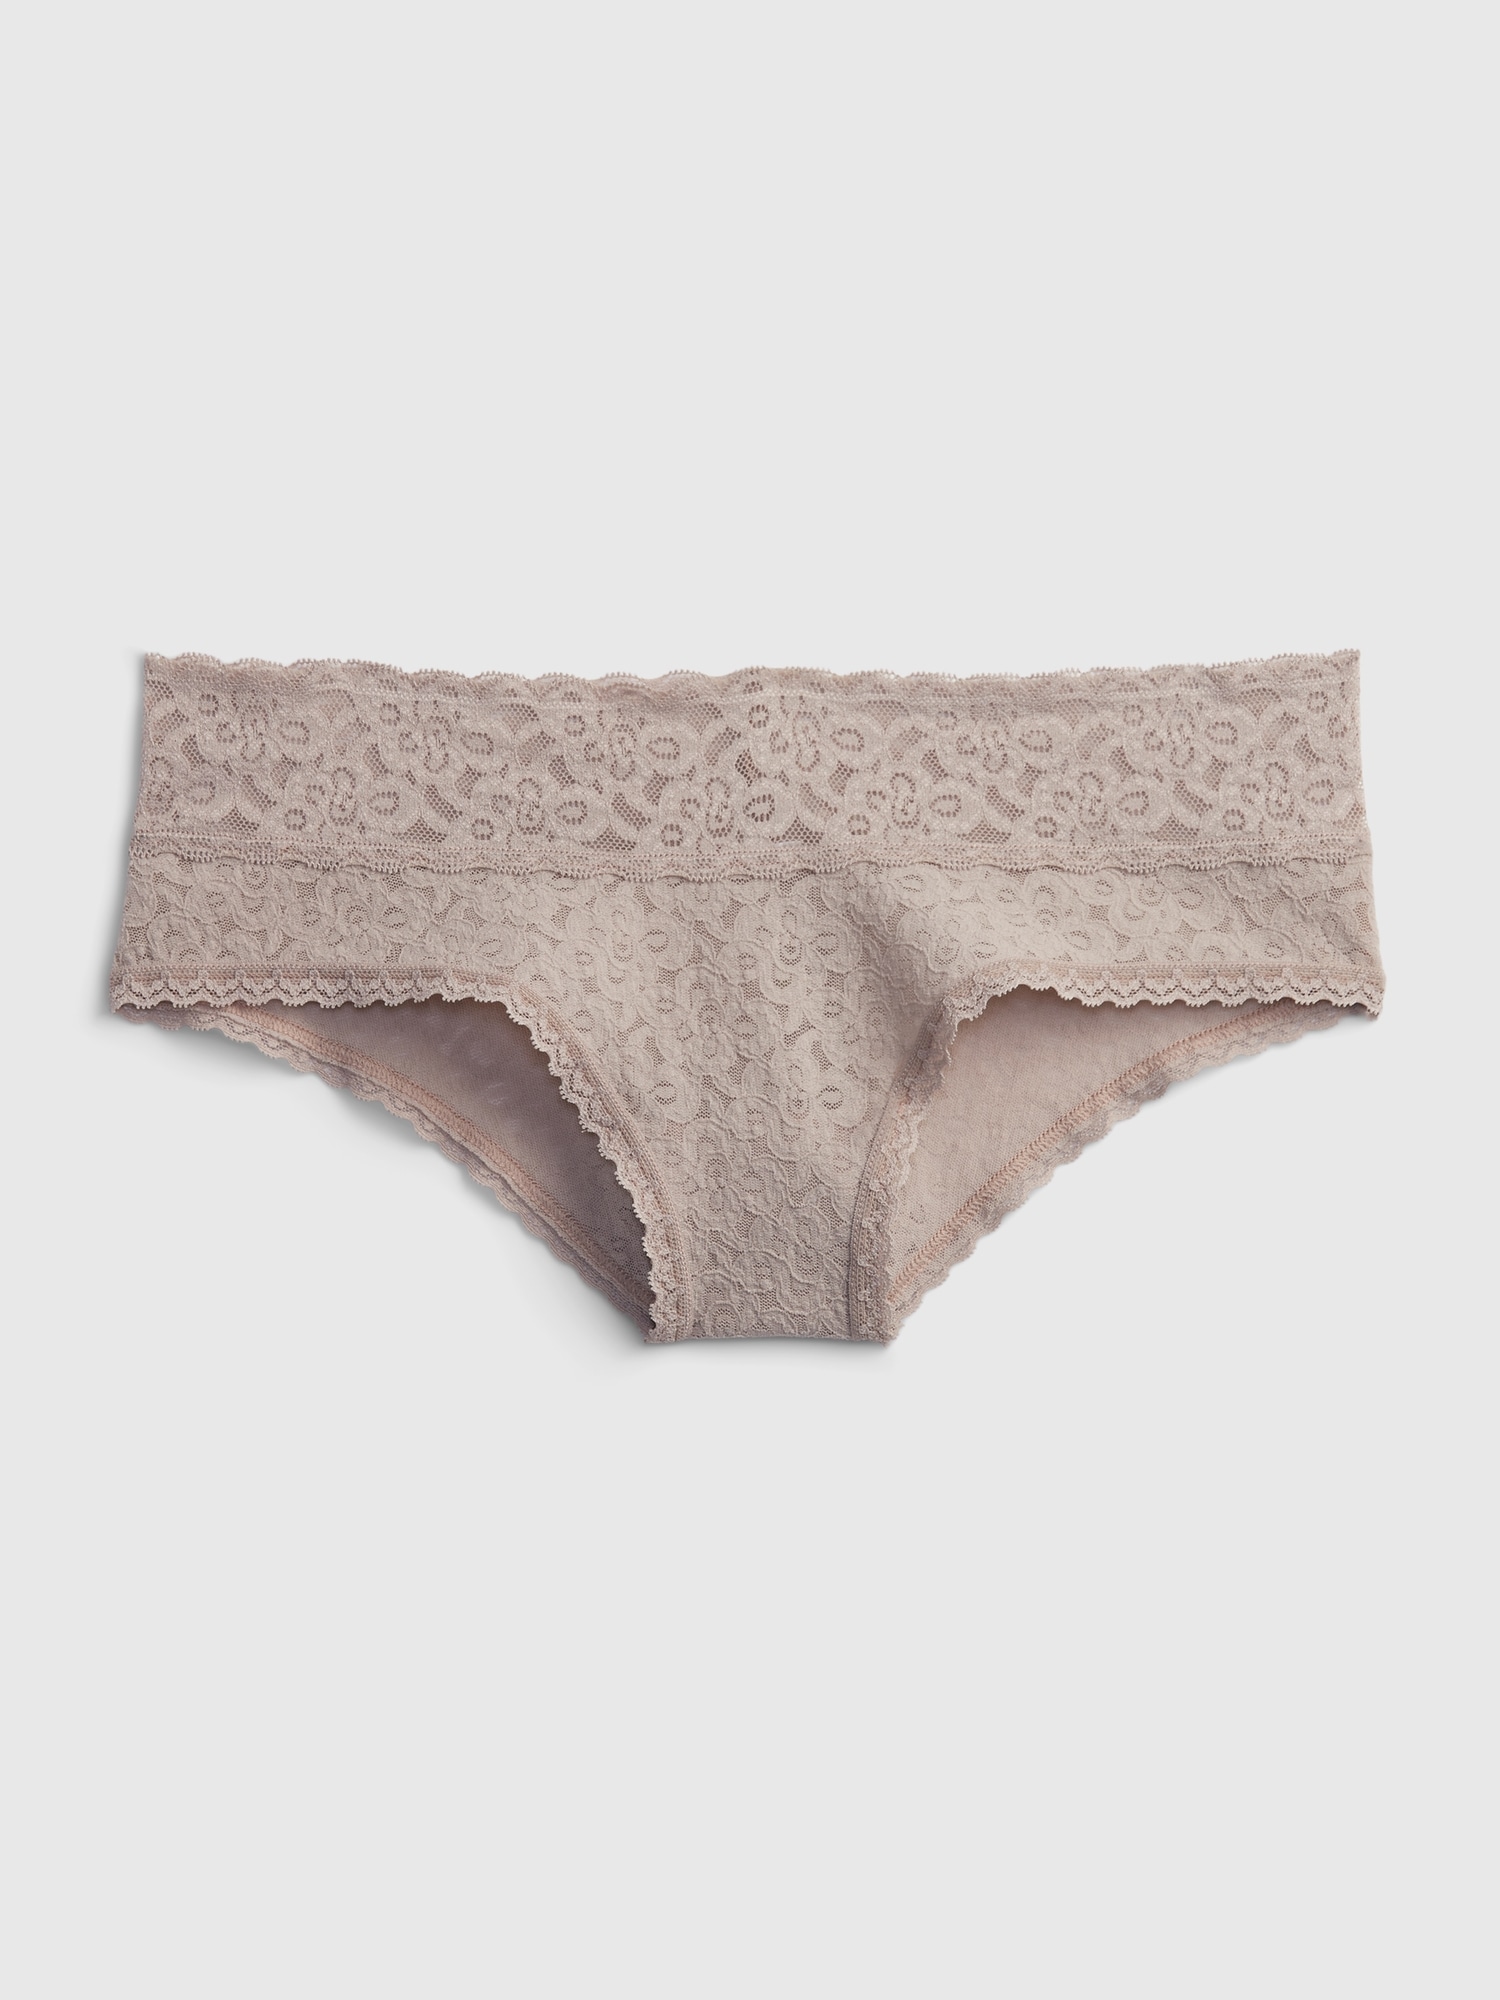 Gap Lace Cheeky In Margate Sand